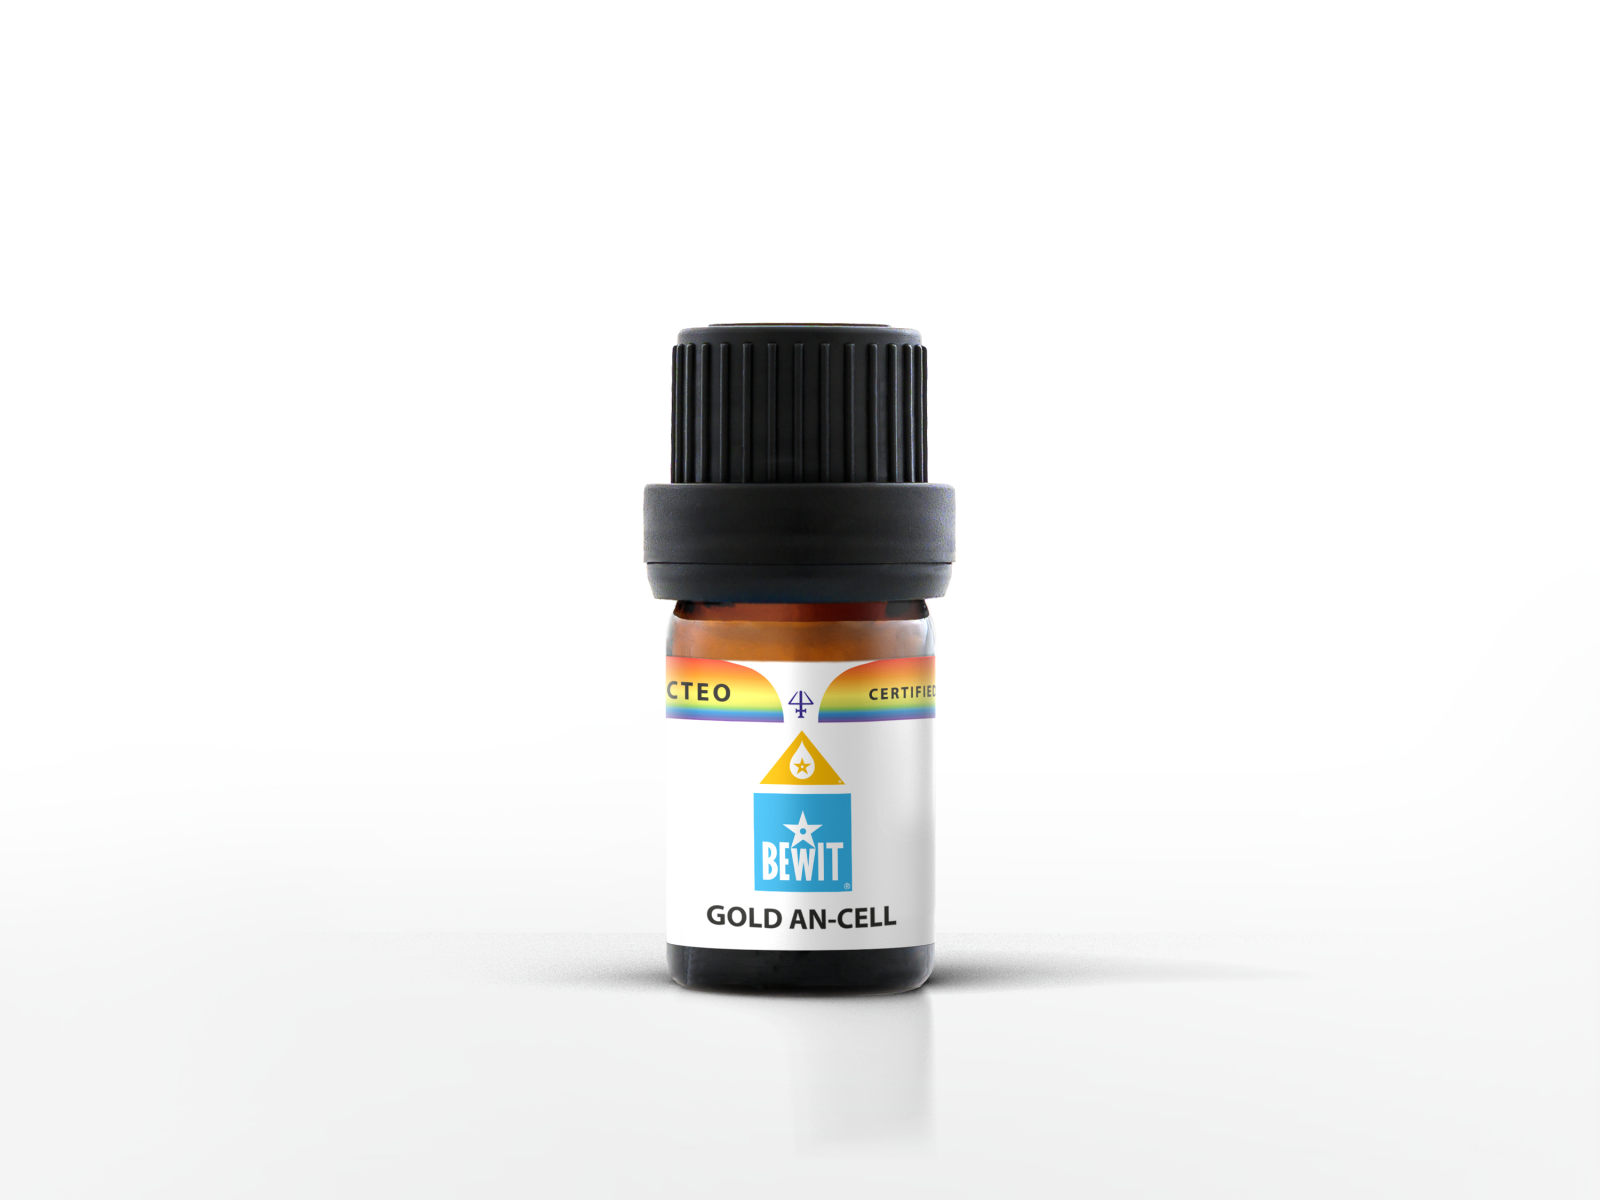 BEWIT GOLD AN-CELL - Blend of essential oils - 2